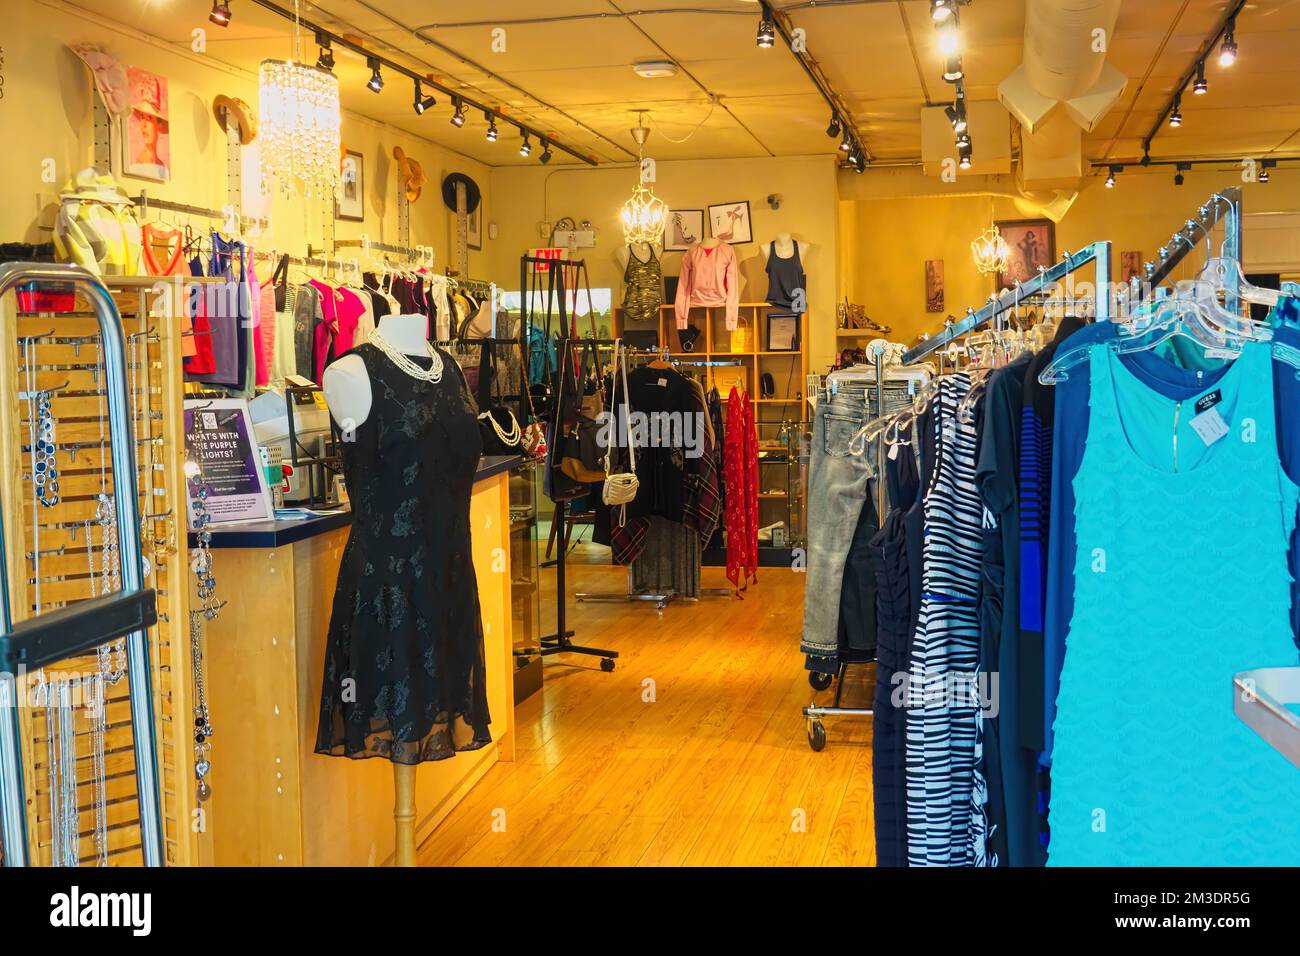 Looking into a Second Hand Boutique displaying preowned garments - Lower Mainland, British Columbia, Canada. Stock Photo